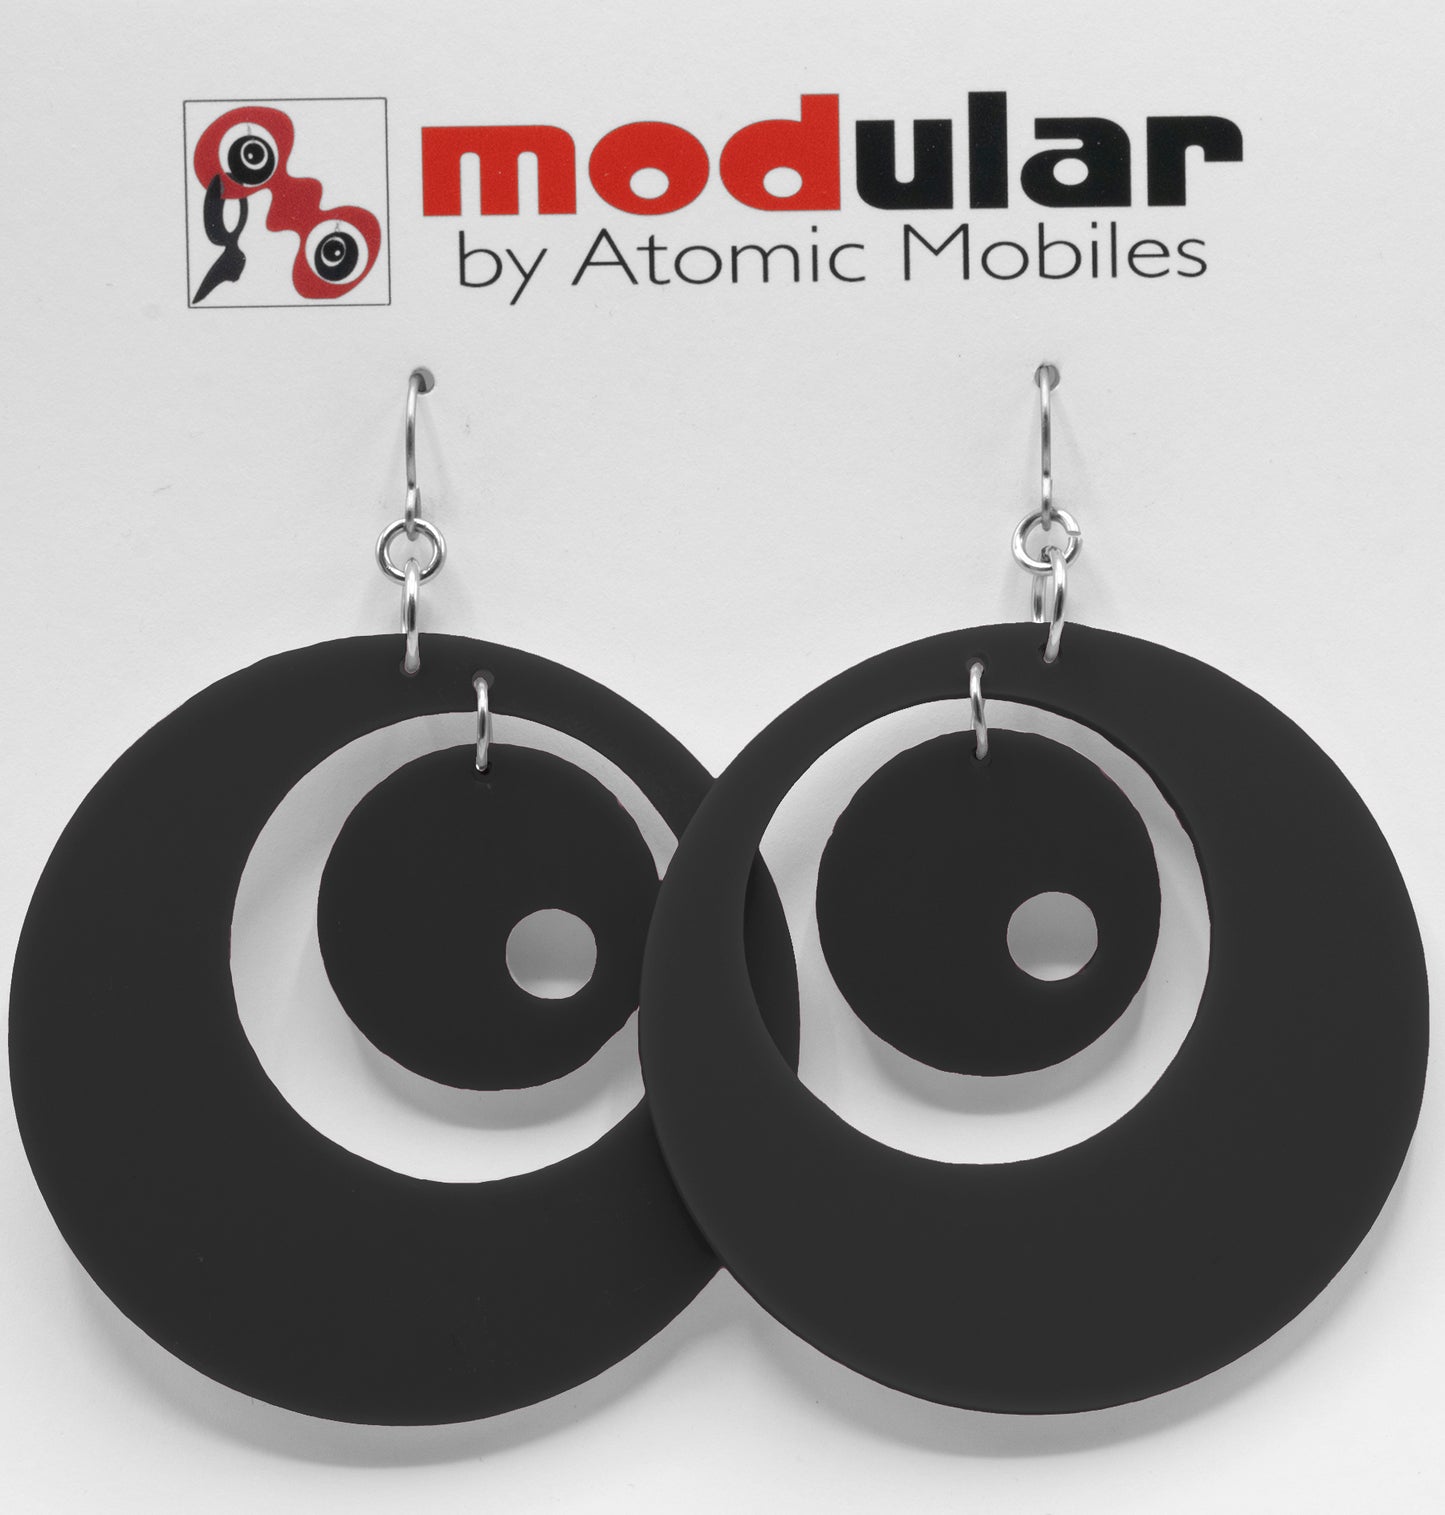 Groovy Statement Earrings in Black - space age midcentury retro inspired dangle earrings - handmade jewelry by AtomicMobiles.com